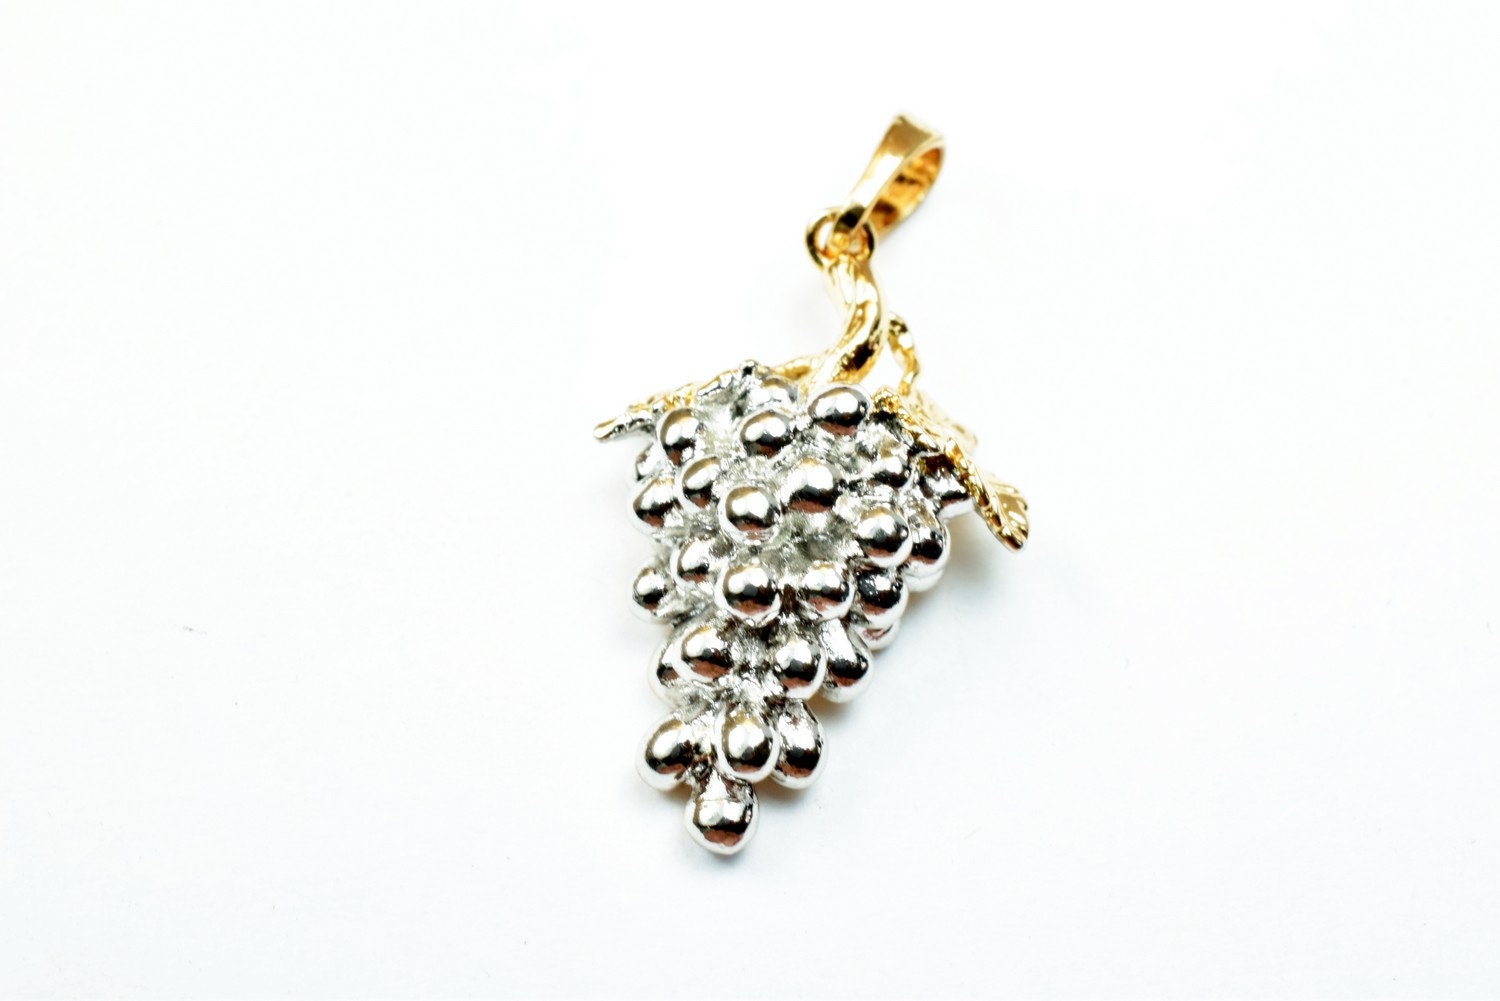 18K as Gold Filled* Bunch of Grapes Pendant Charm Size 23x15mm as Gold Filled* Pendant For Jewelry Making GP148